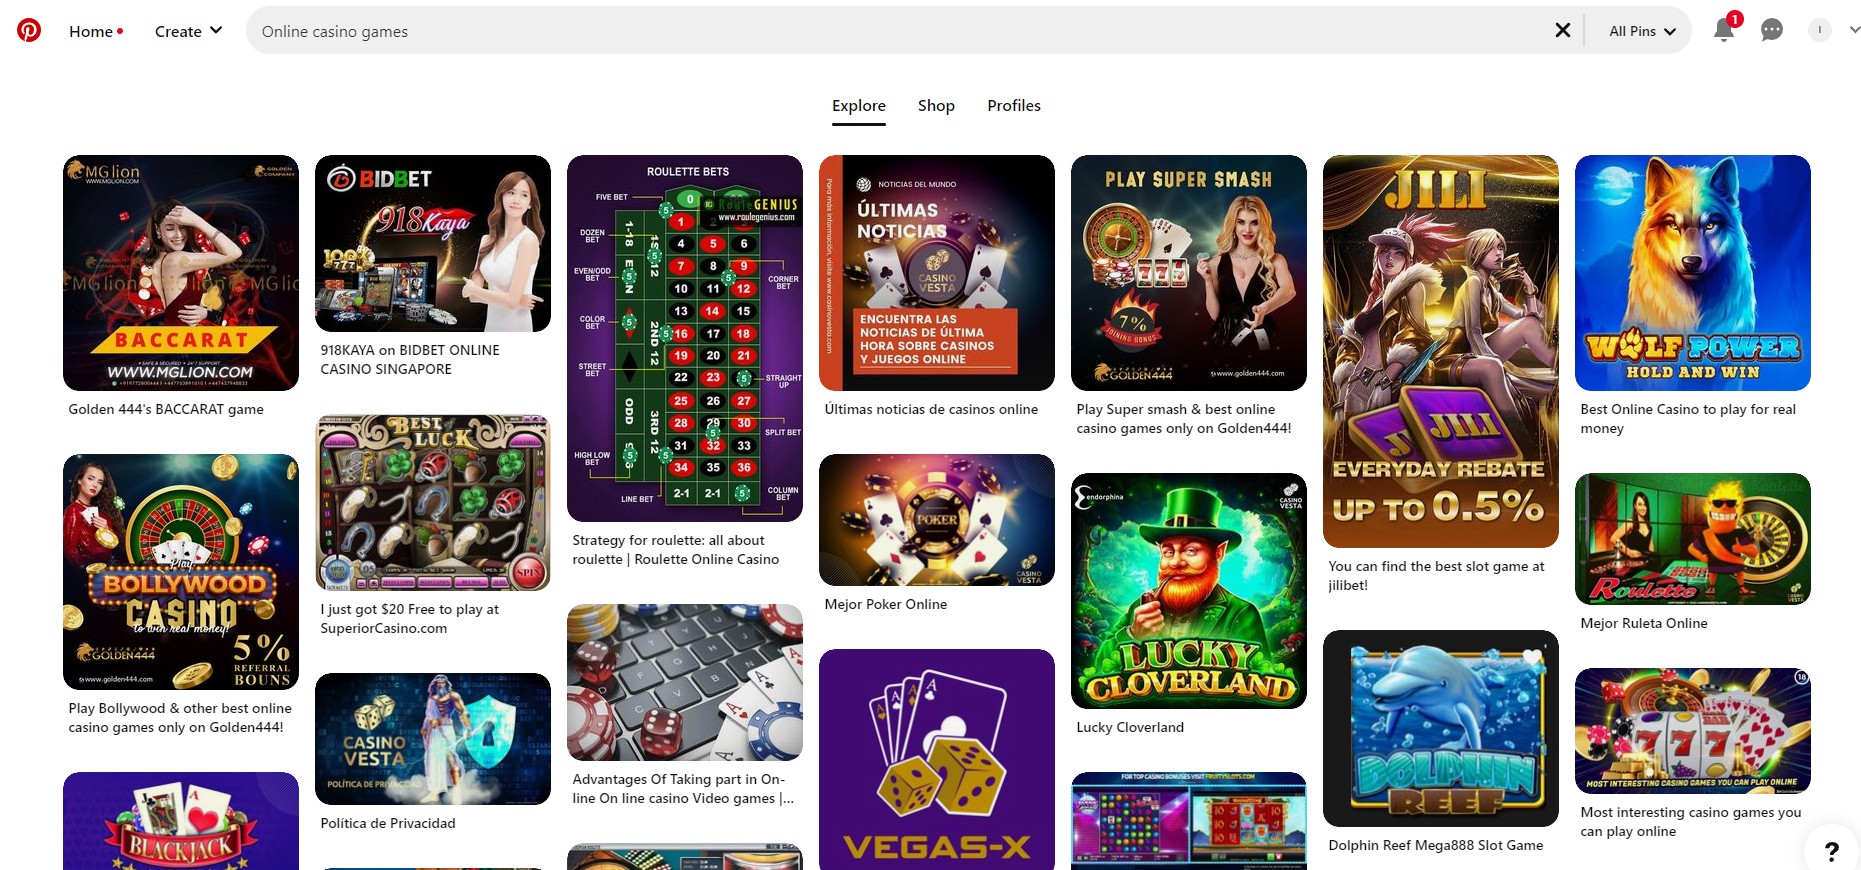 iGaming and dating on Pinterest